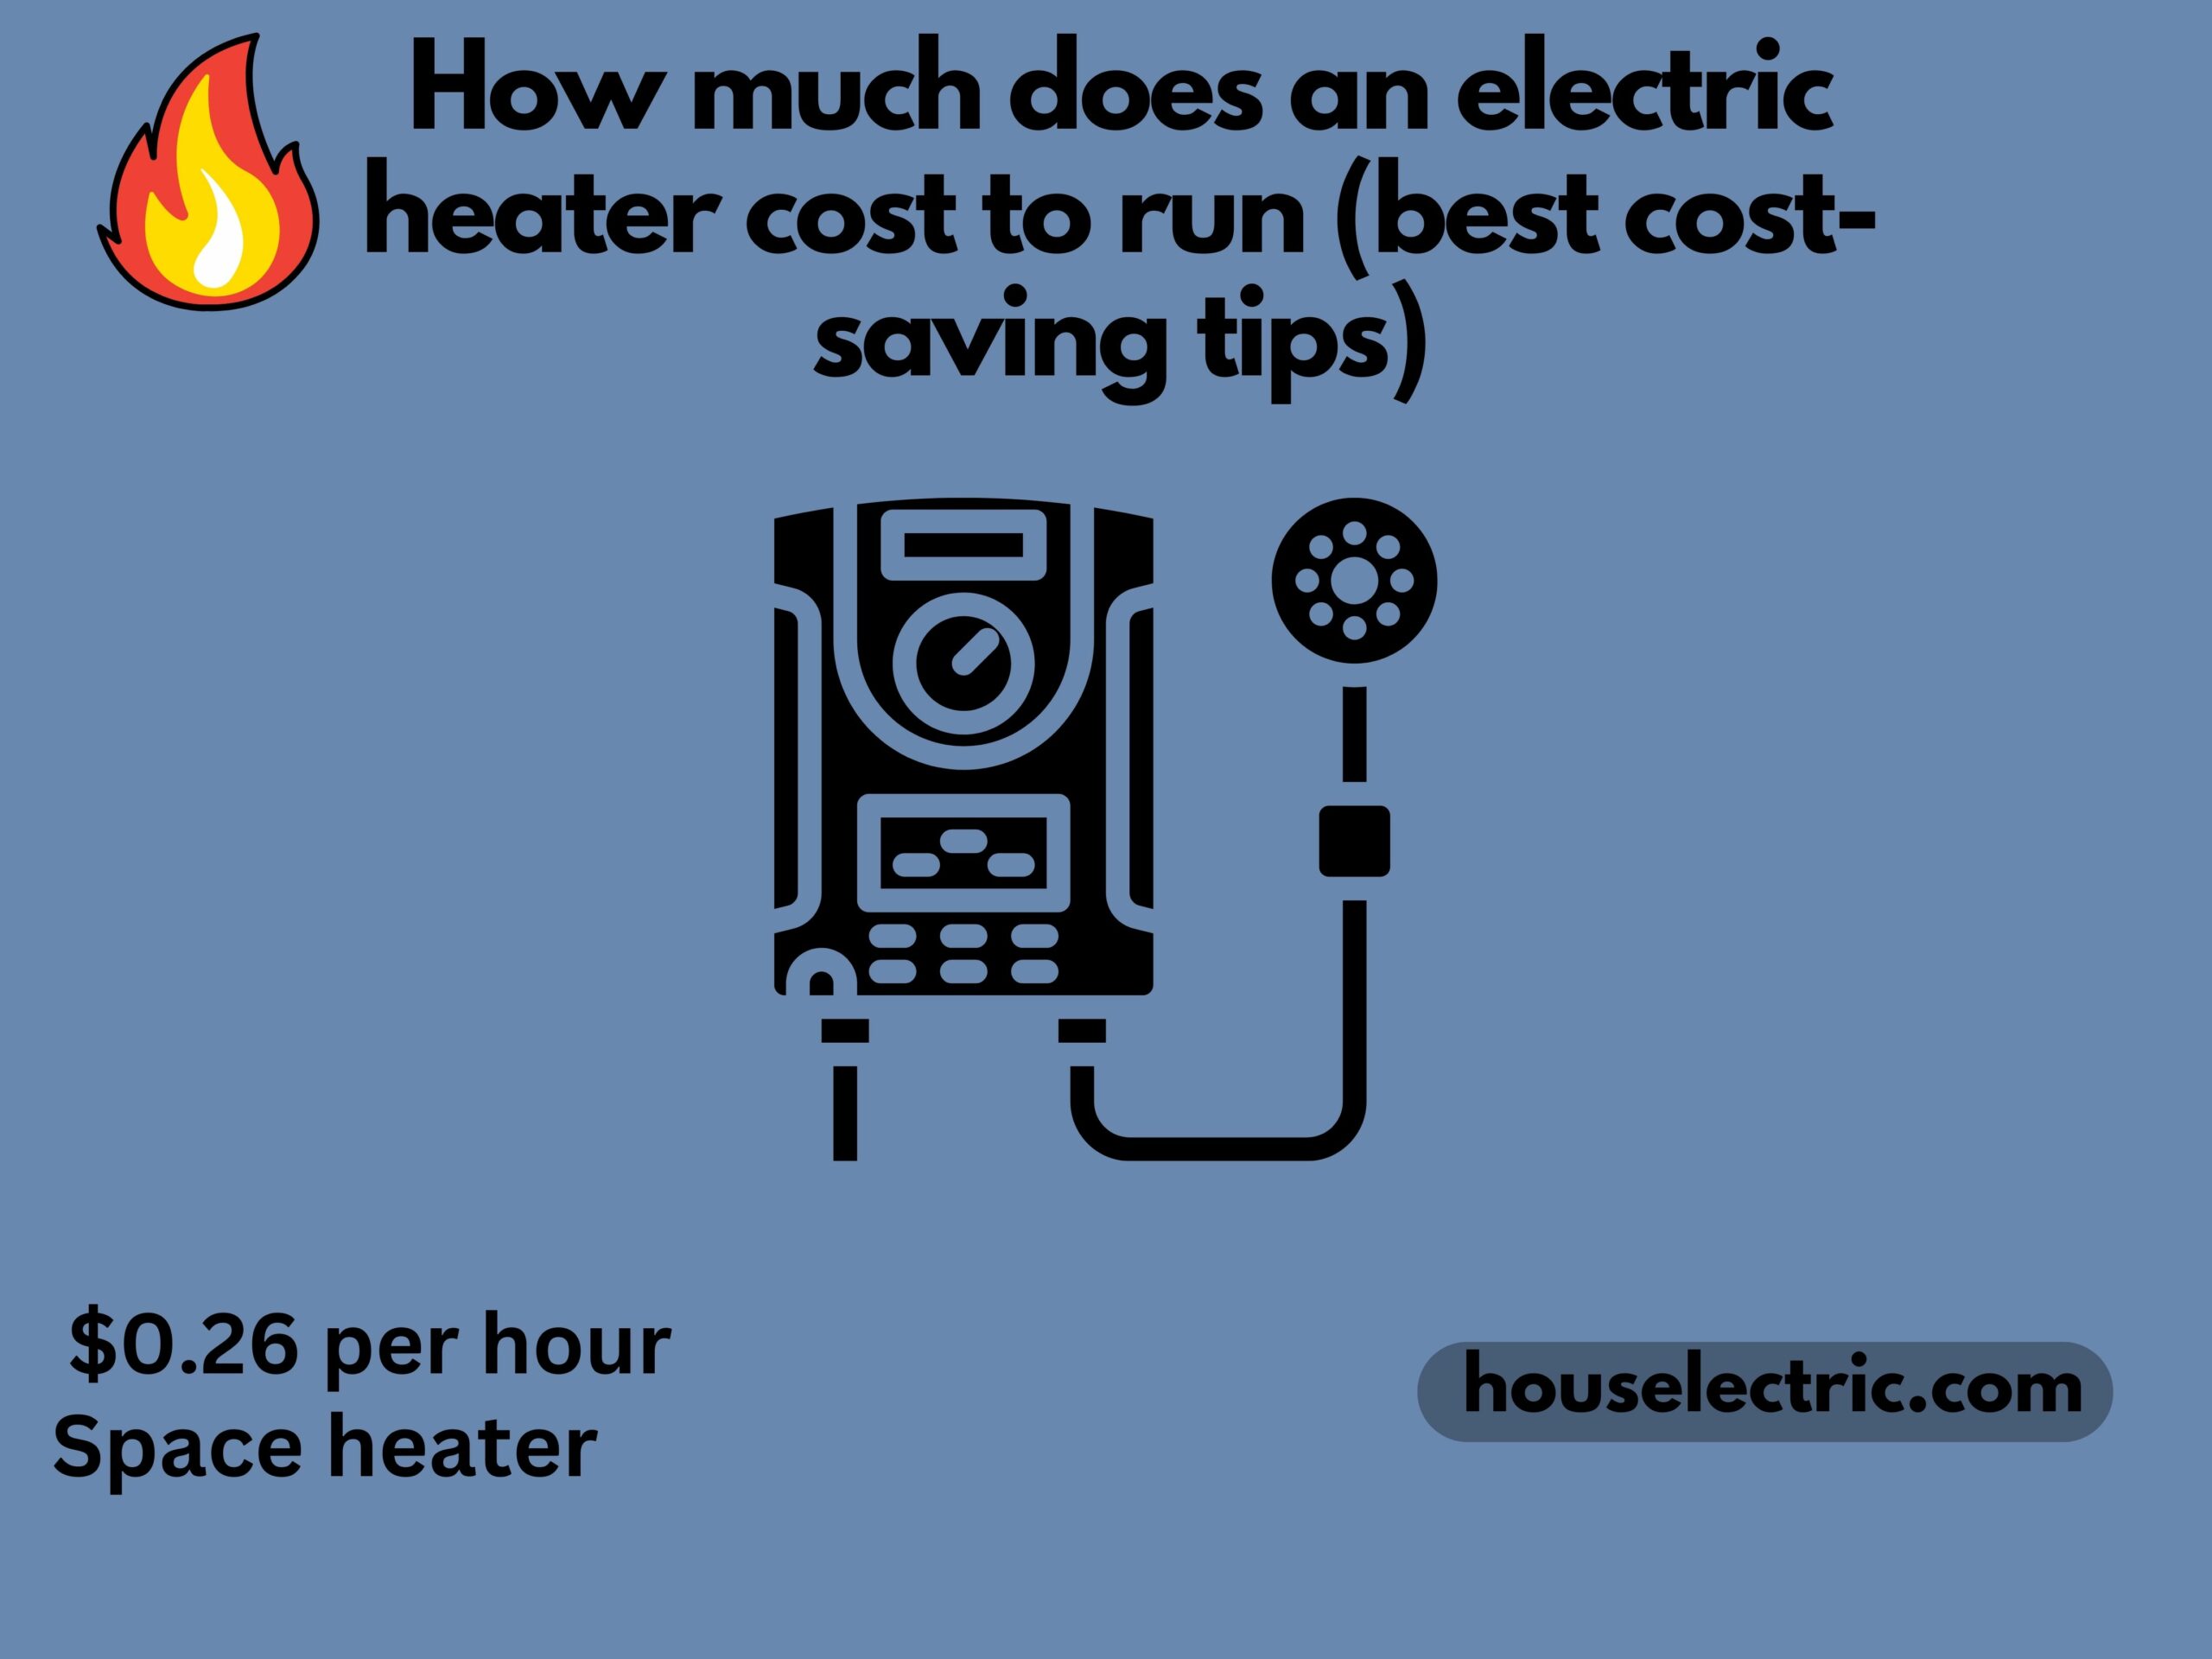 an electric heater cost to run